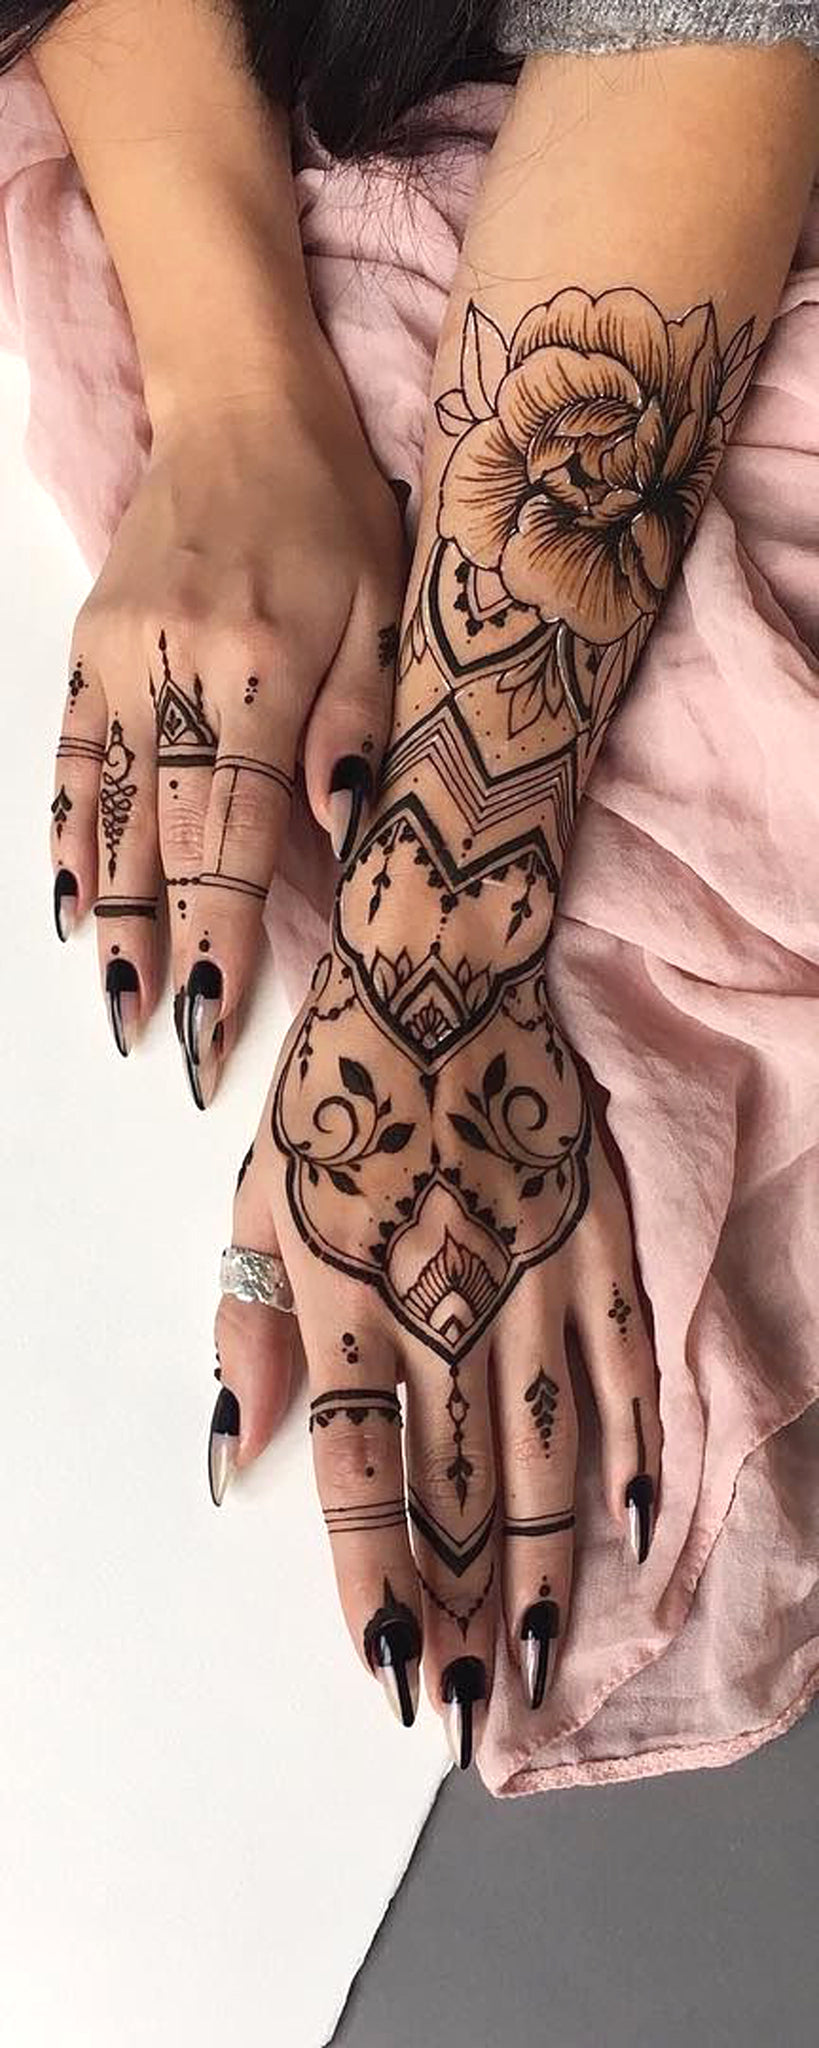 30+ Unique Arm Tattoo Ideas that are Simple Yet Have ...